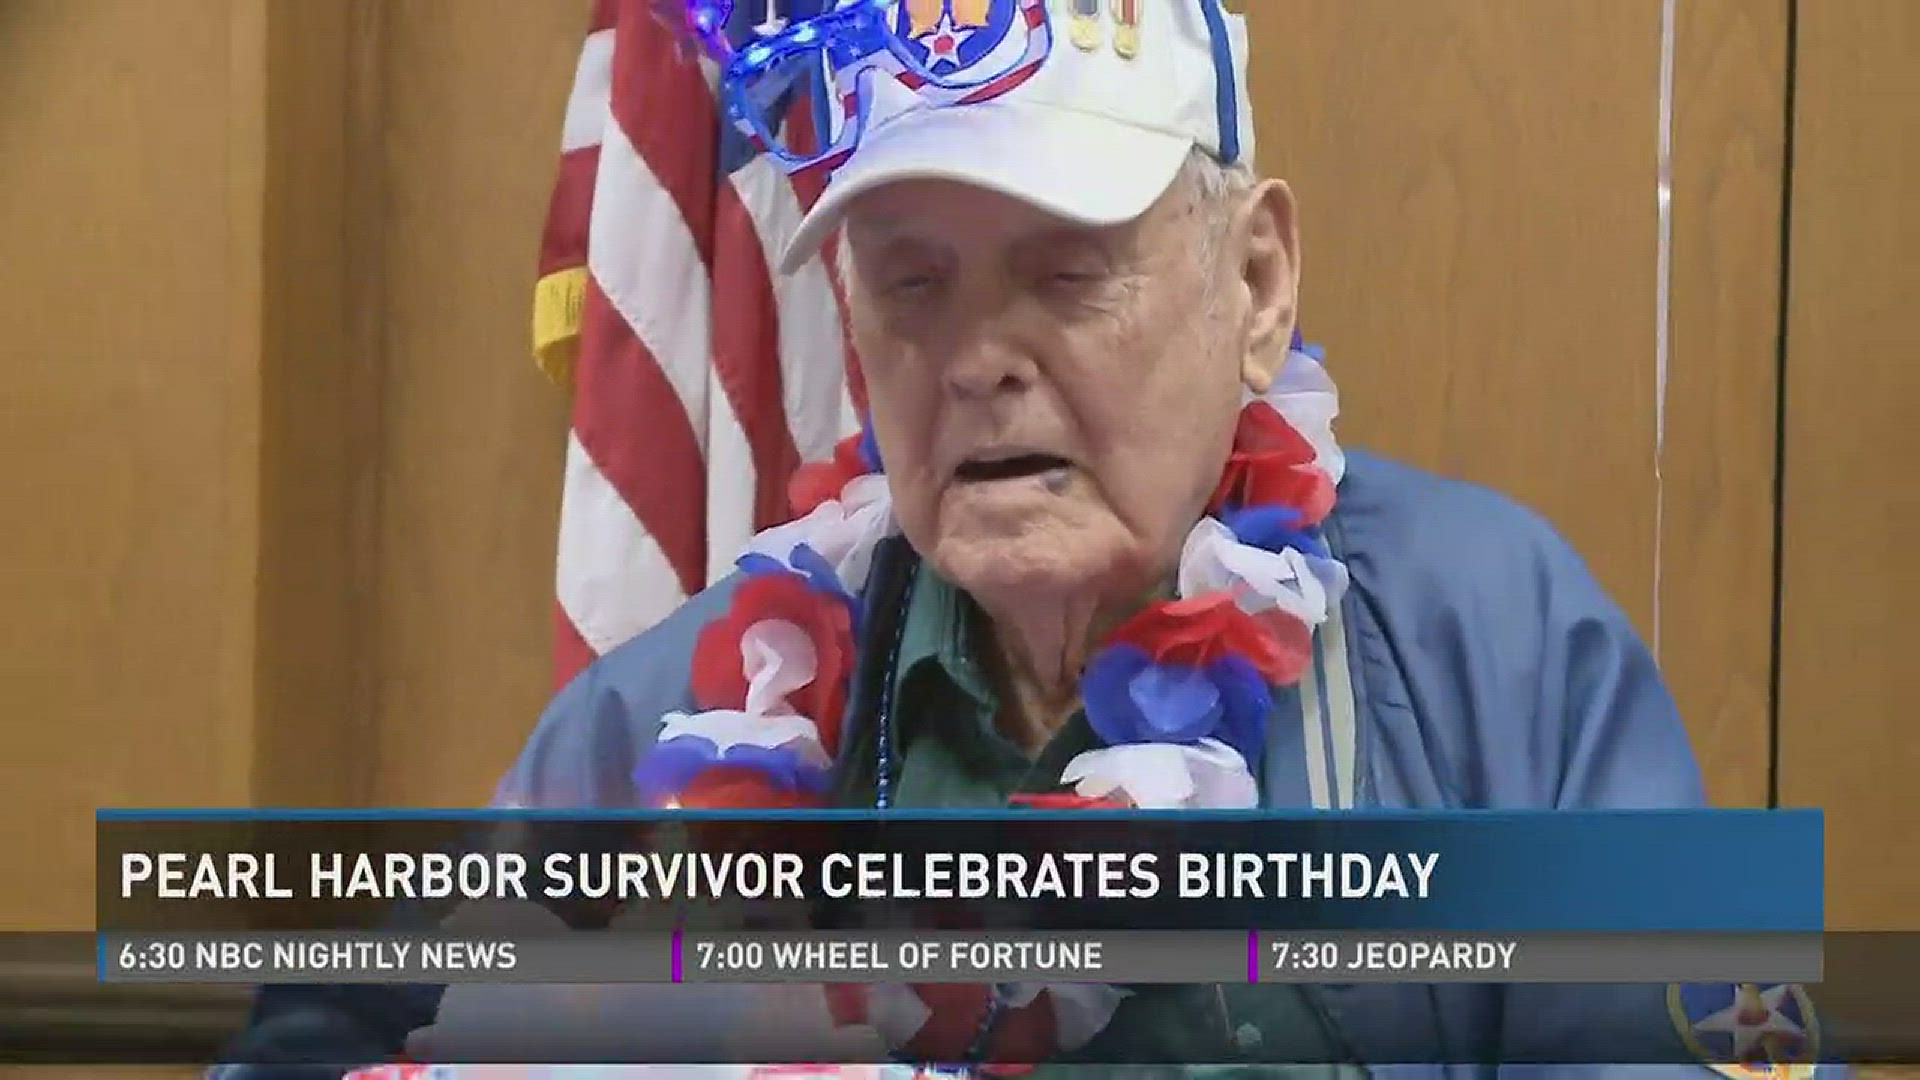 A very happy birthday to Durward Swanson, who's celebrating his 96th.